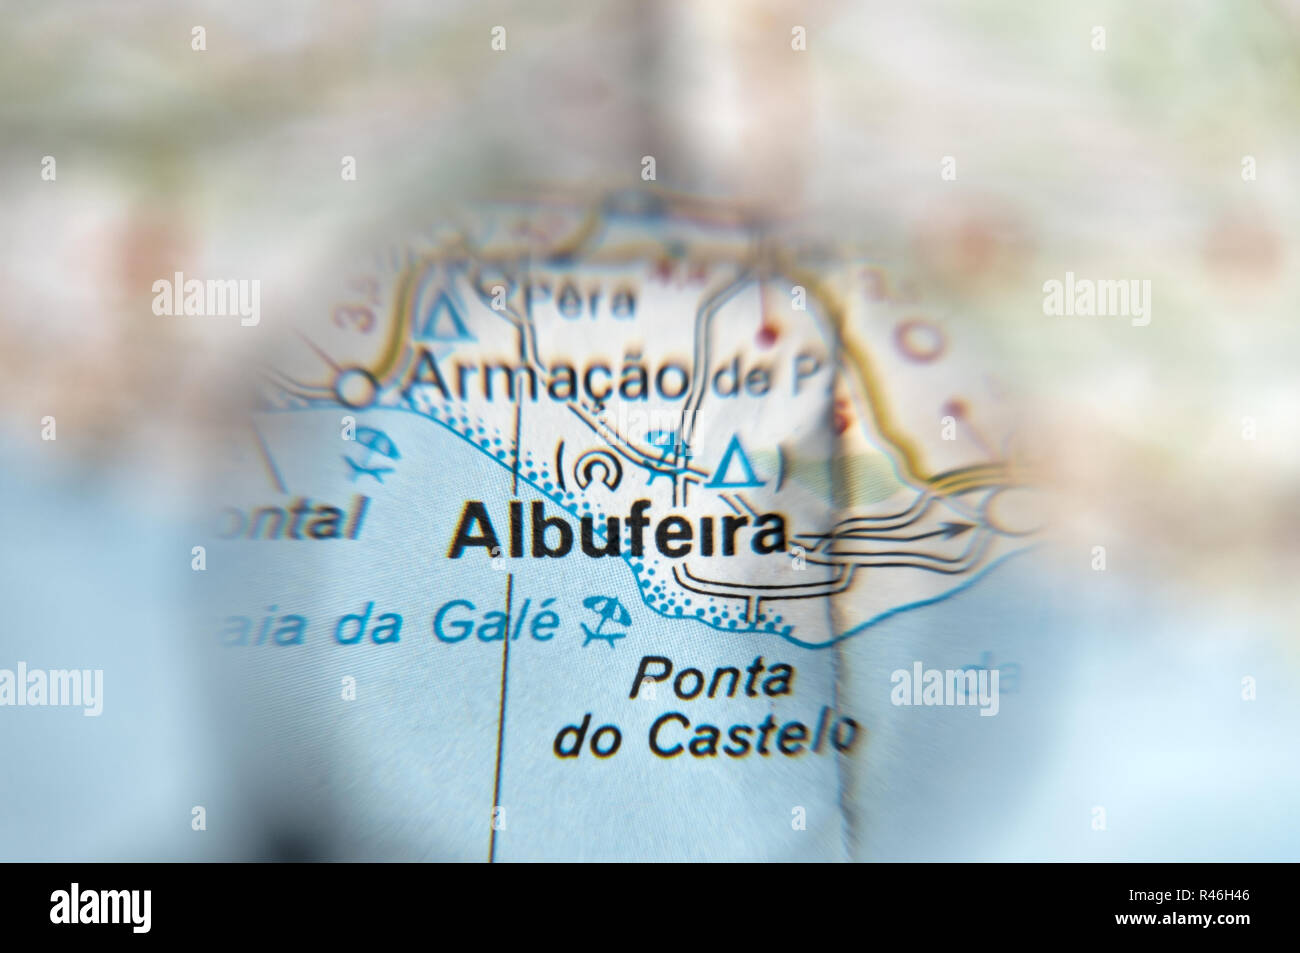 Albufeira magnified on a map. Algarve, Portugal Stock Photo